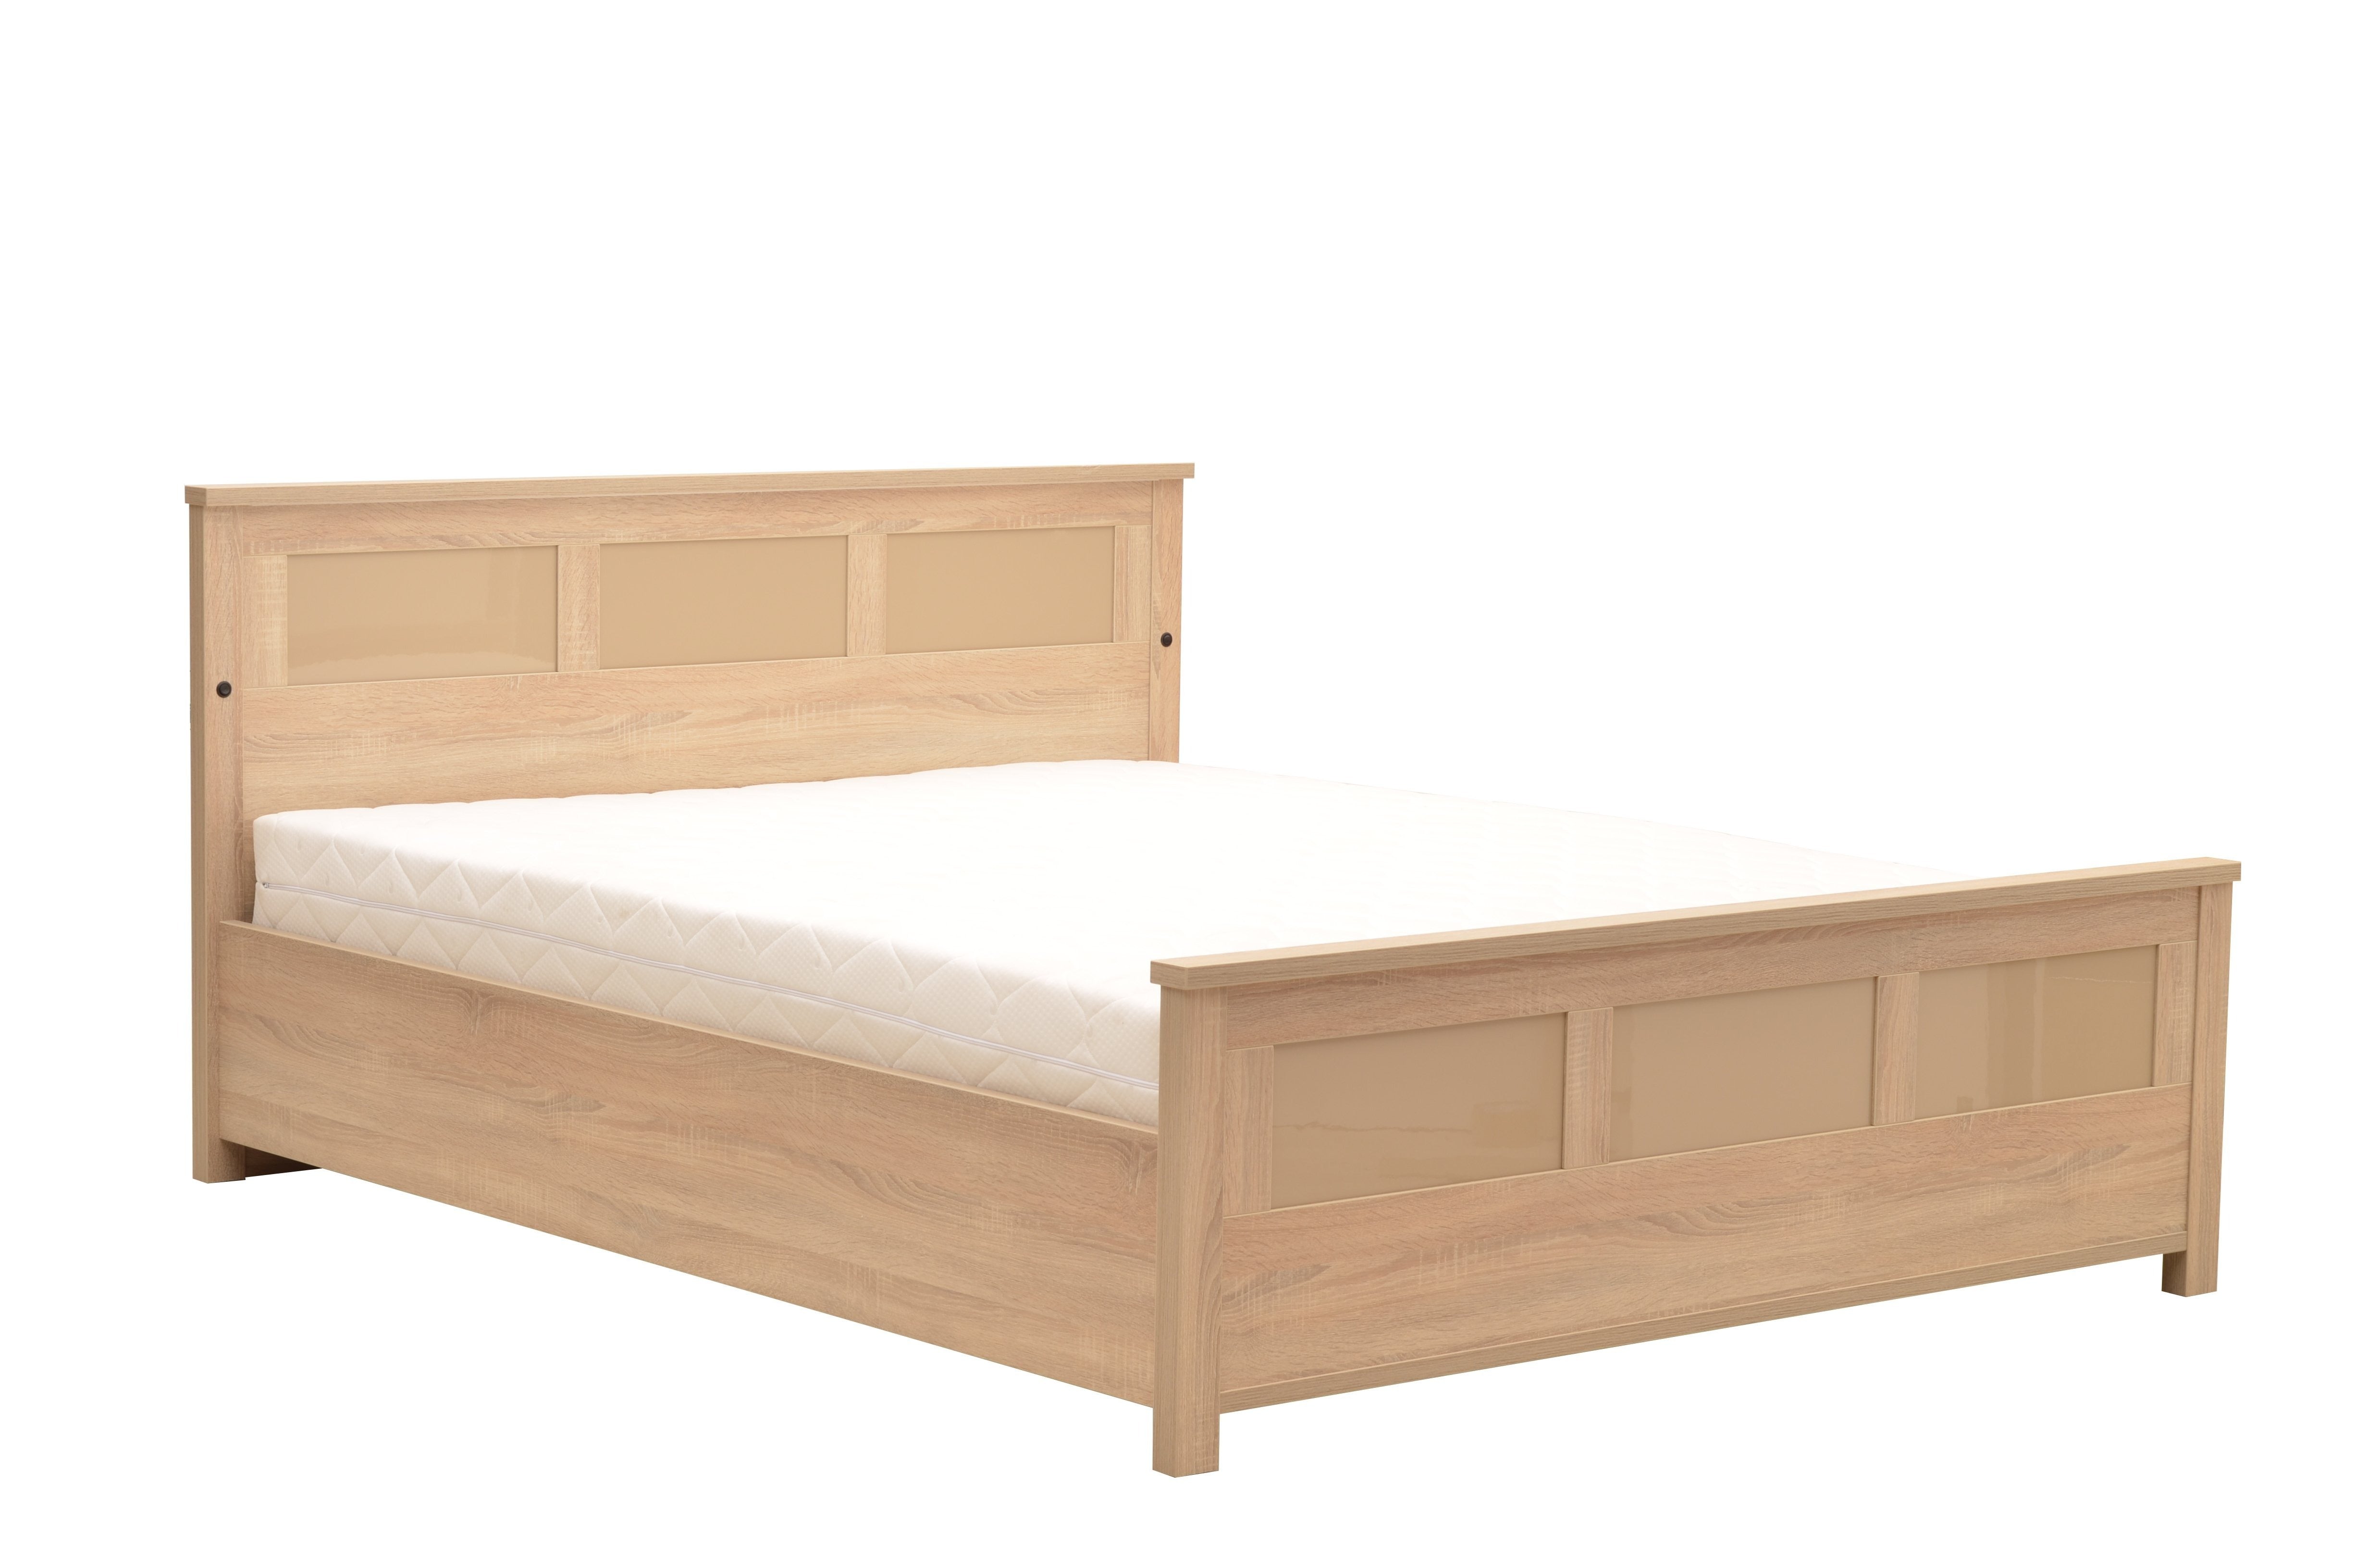 View Cremona Bed with LED in 3 Sizes 180cm Bed information